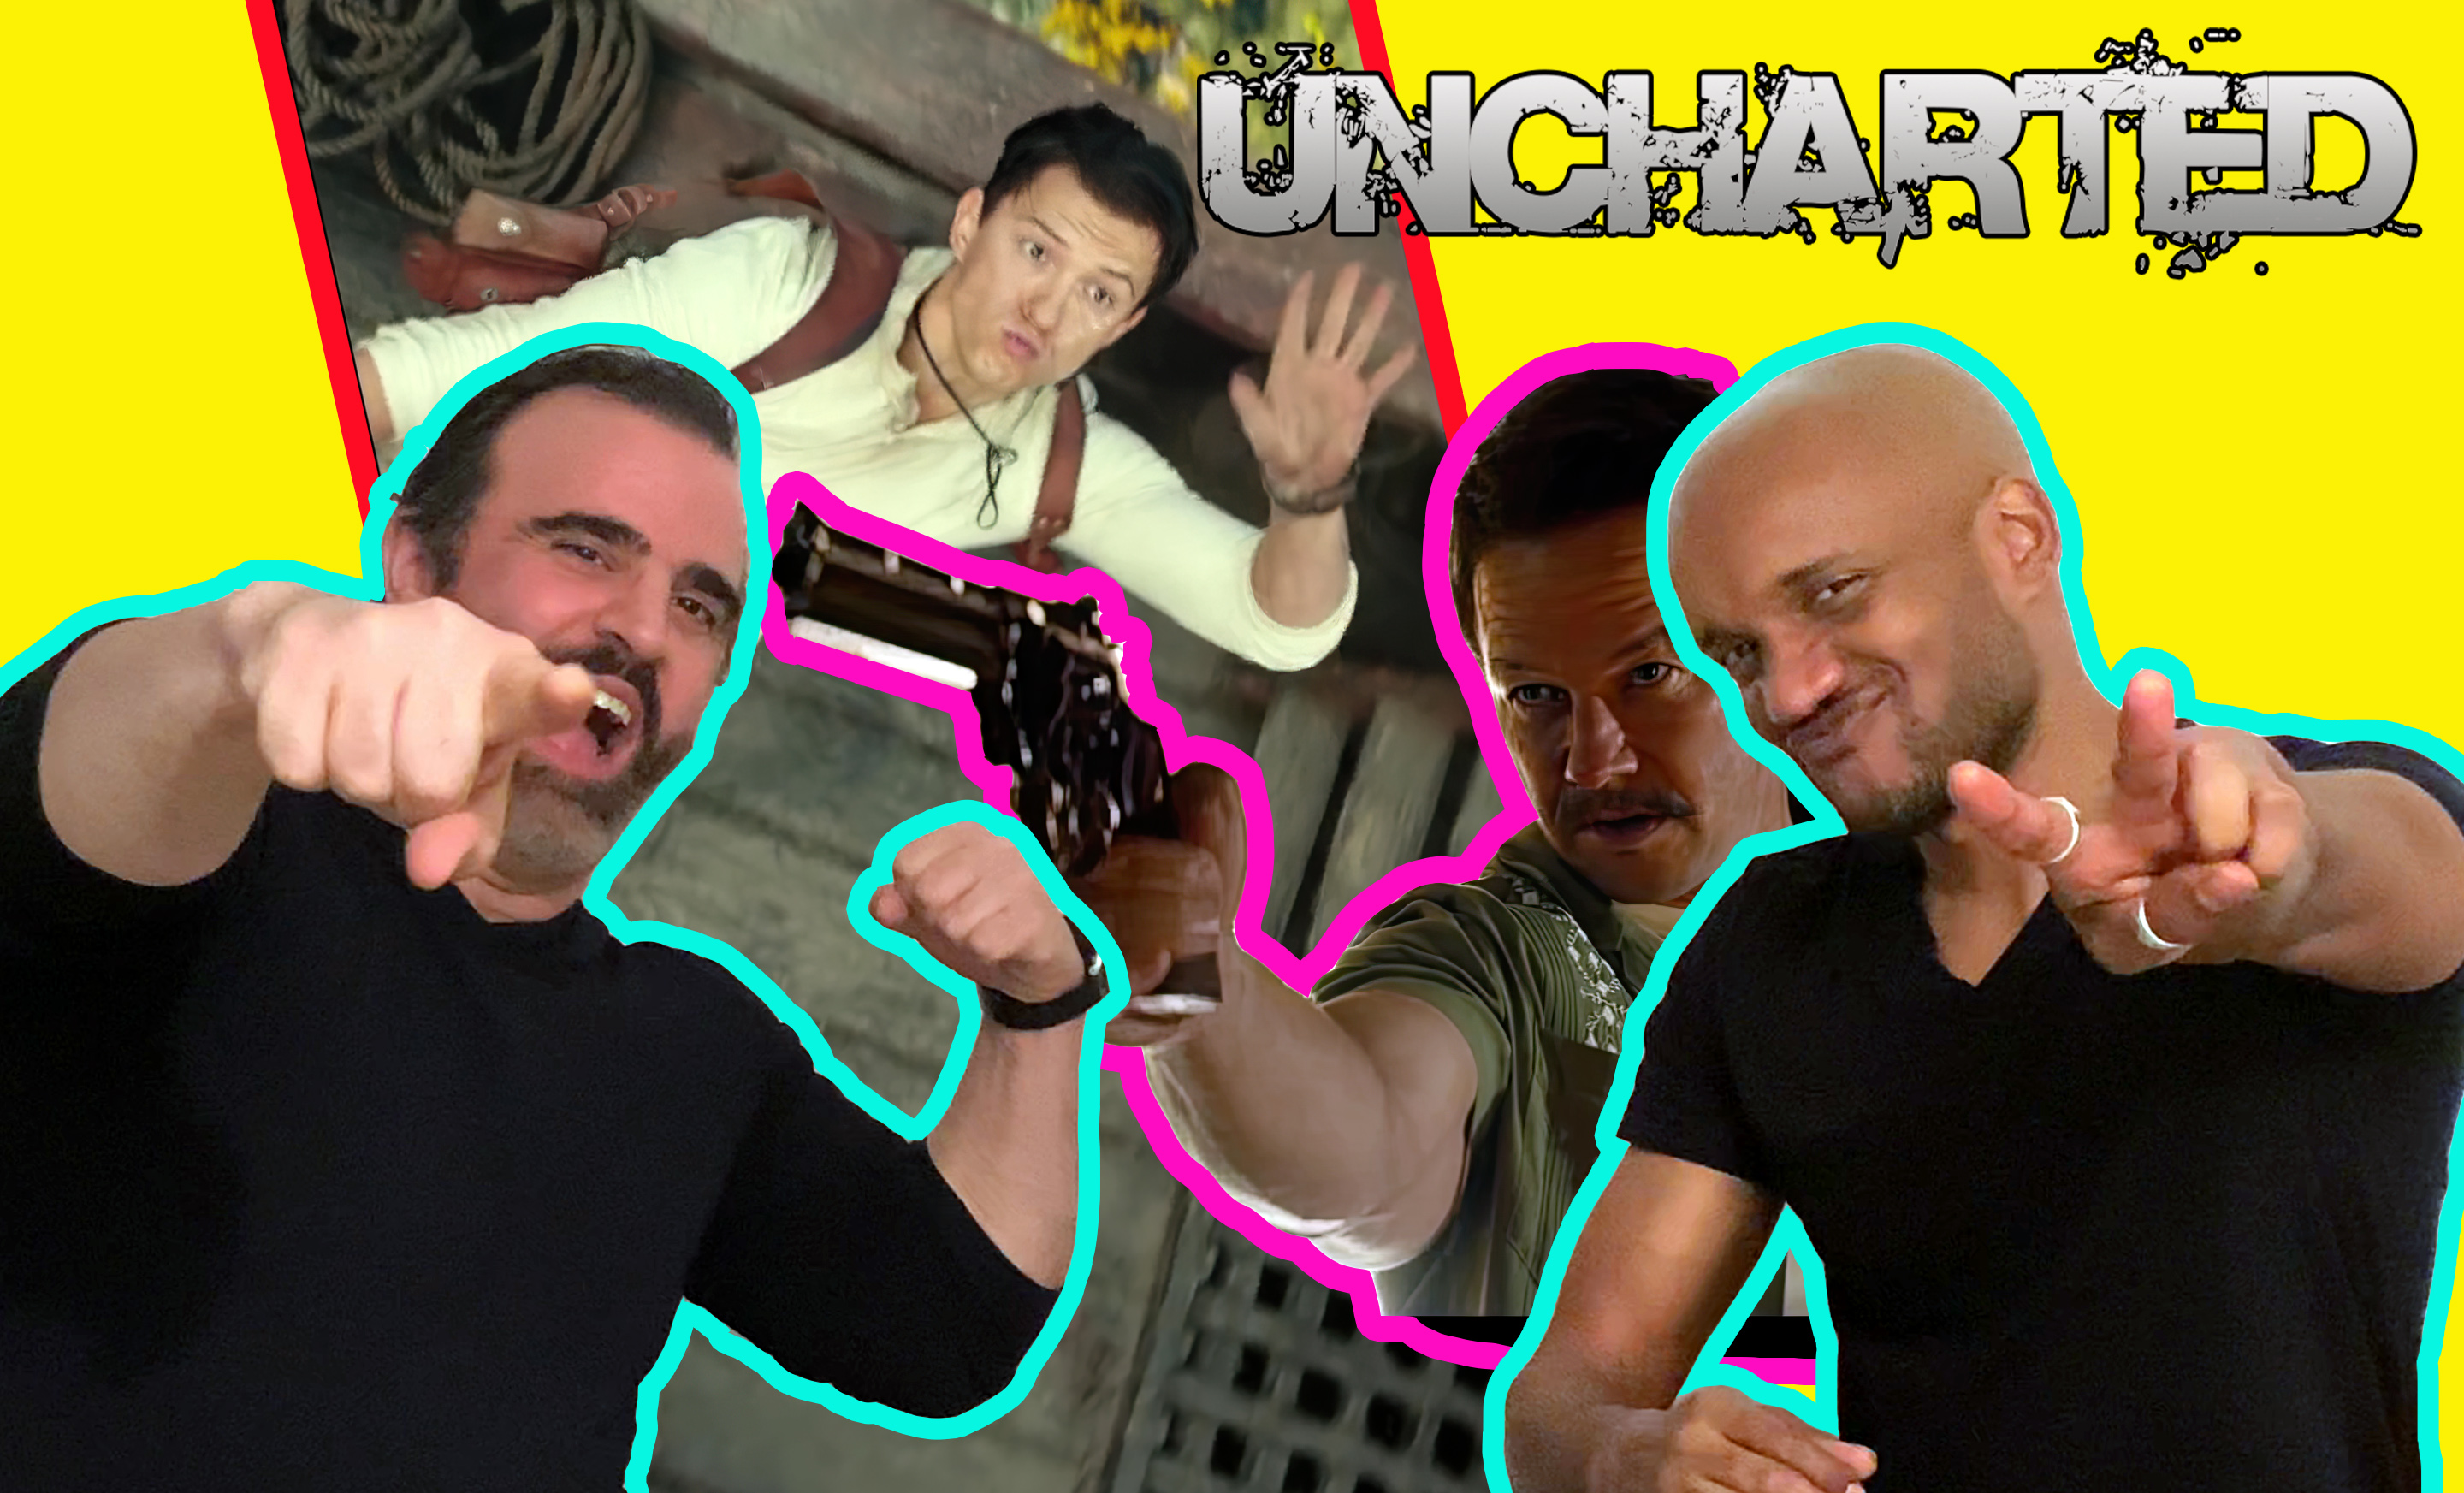 Uncharted Movie Review 